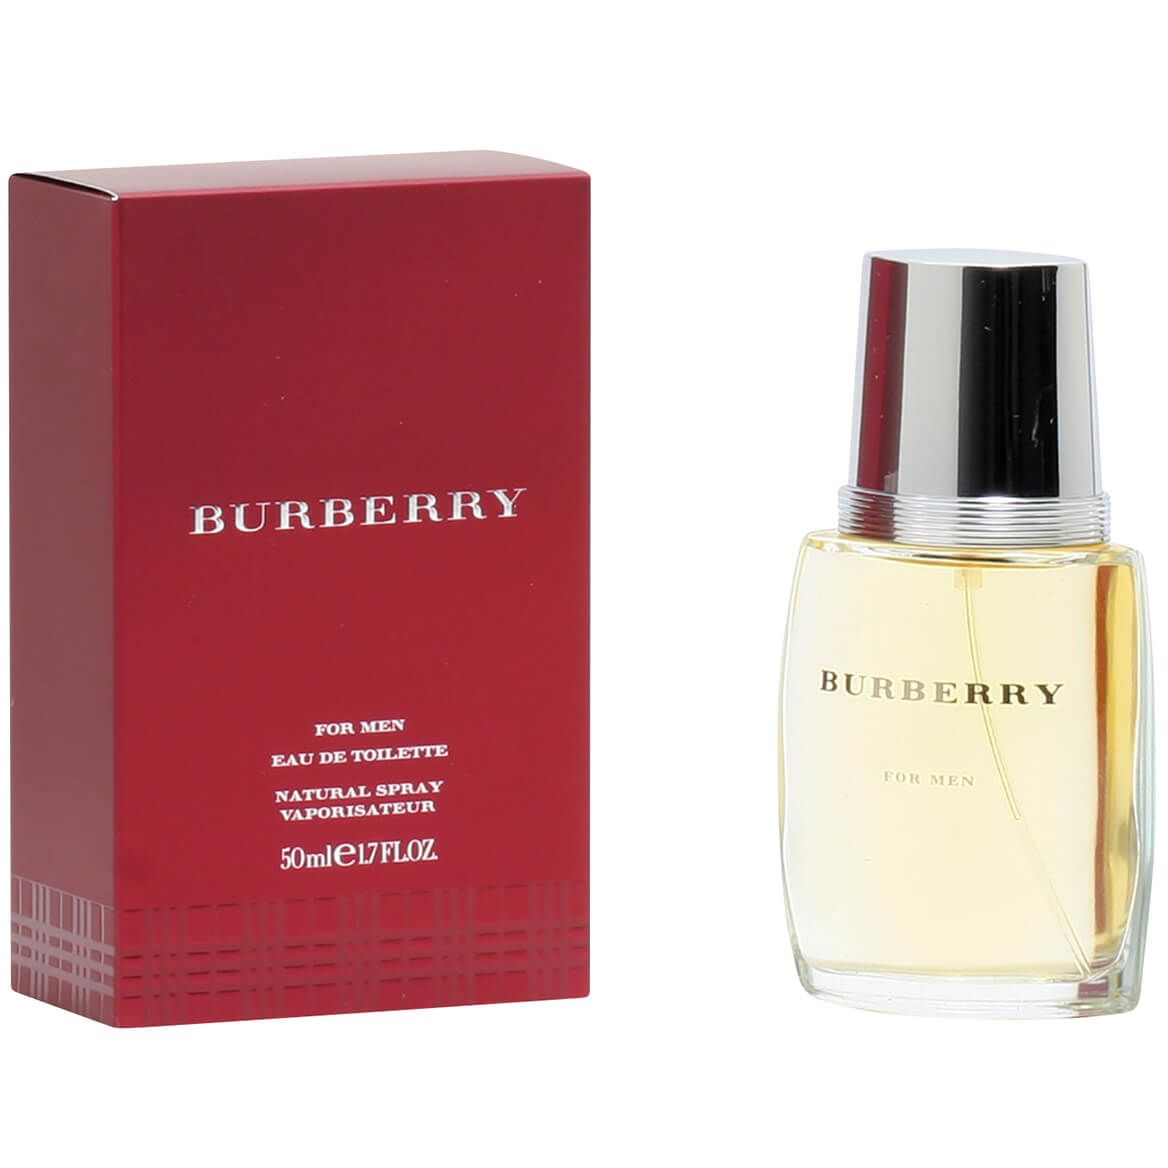 Burberry Classic by Burberry for Men EDT, 1.7 oz. + '-' + 373144